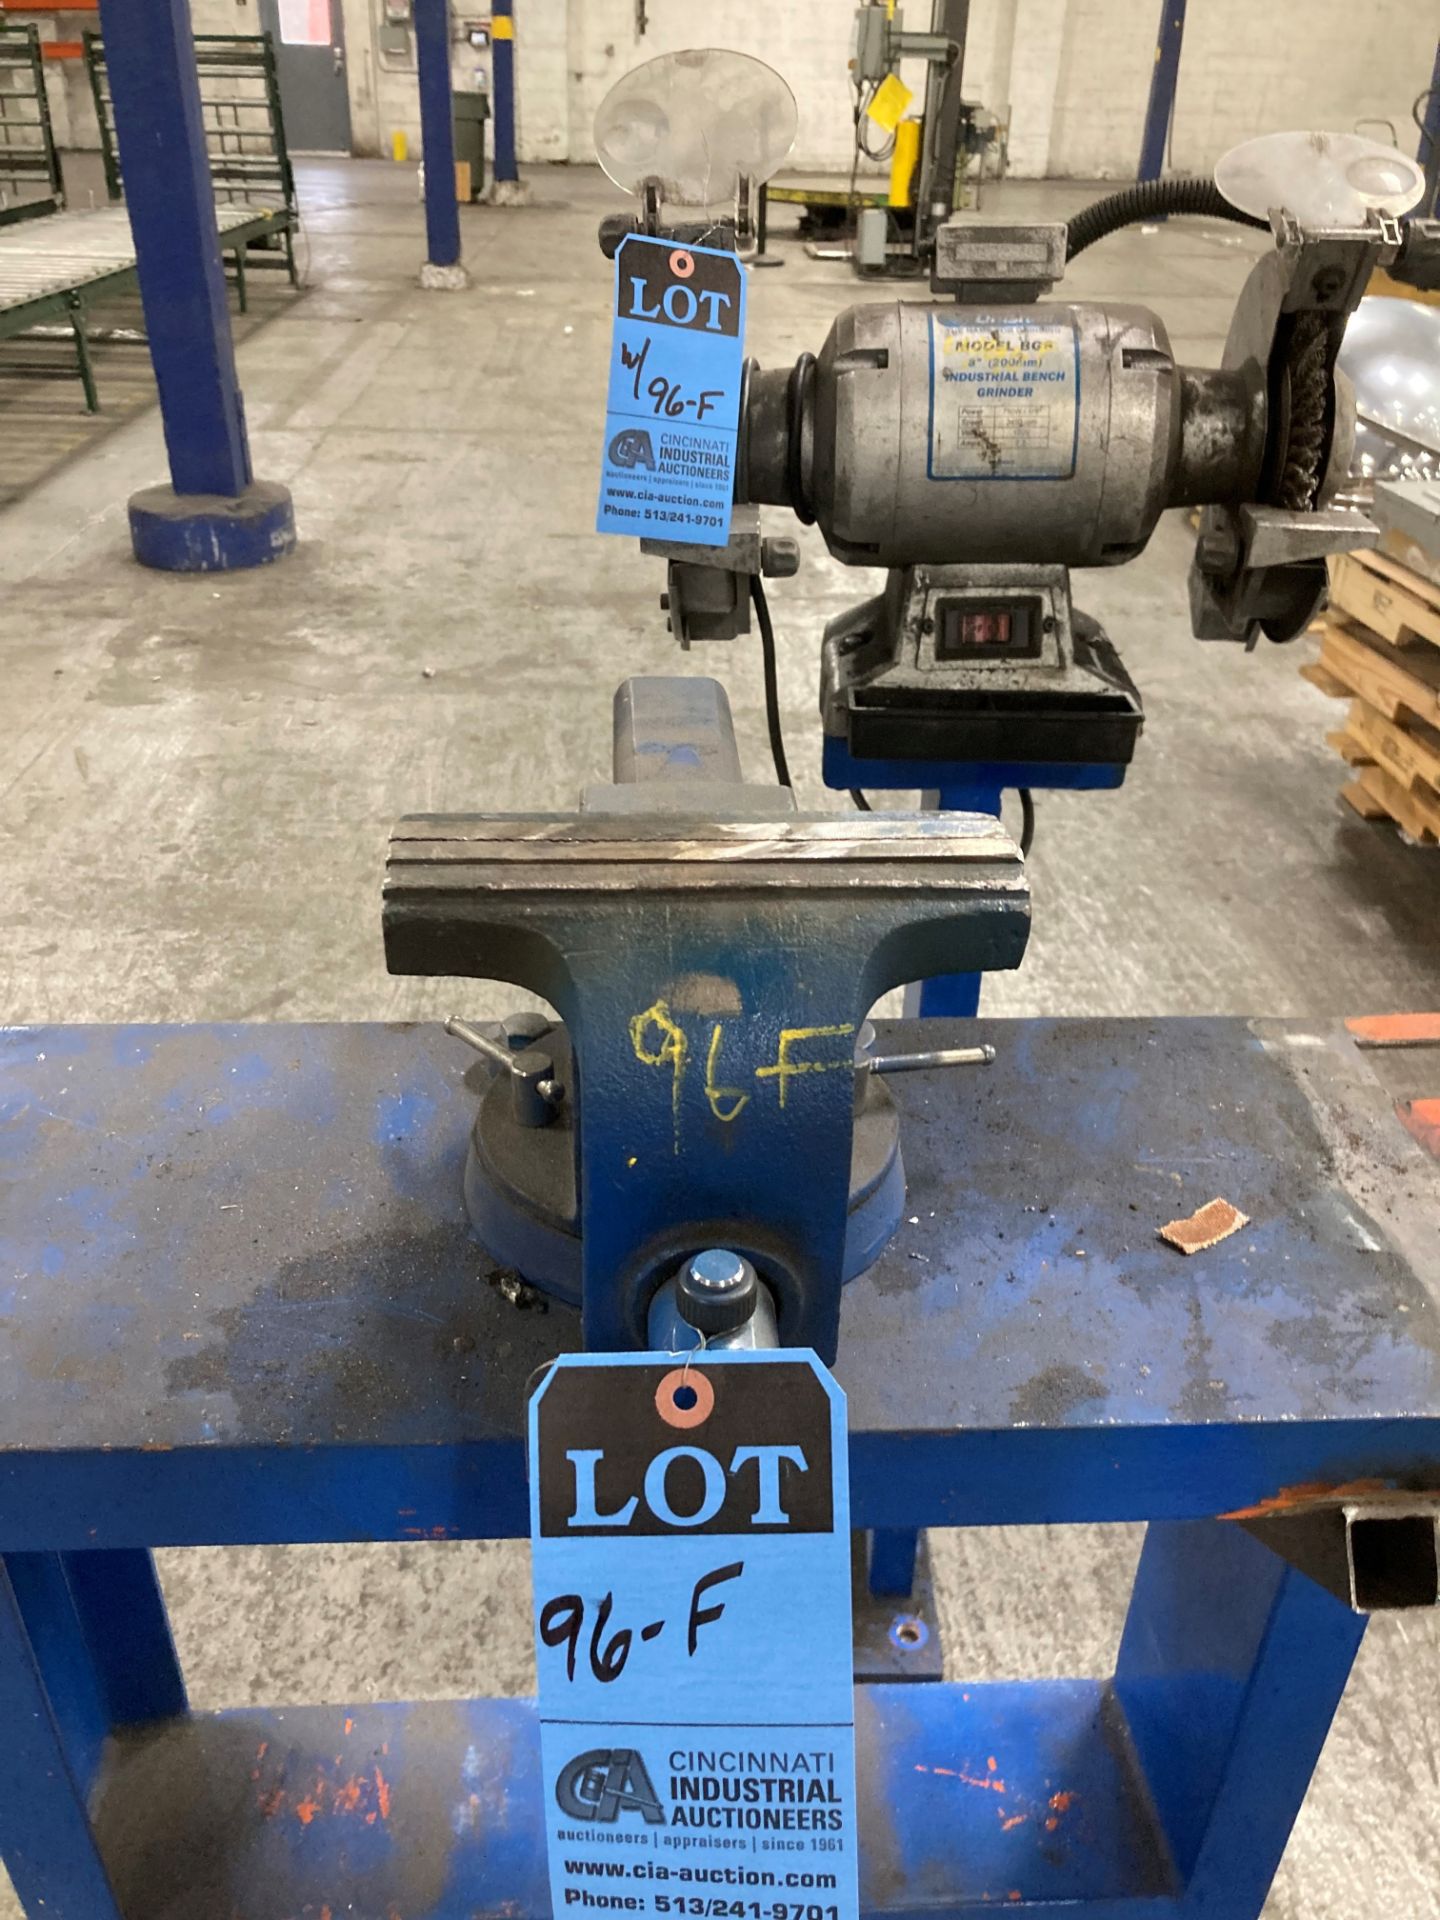 (LOT) 7" VISE WITH STAND AND 1 HP DE GRINDER